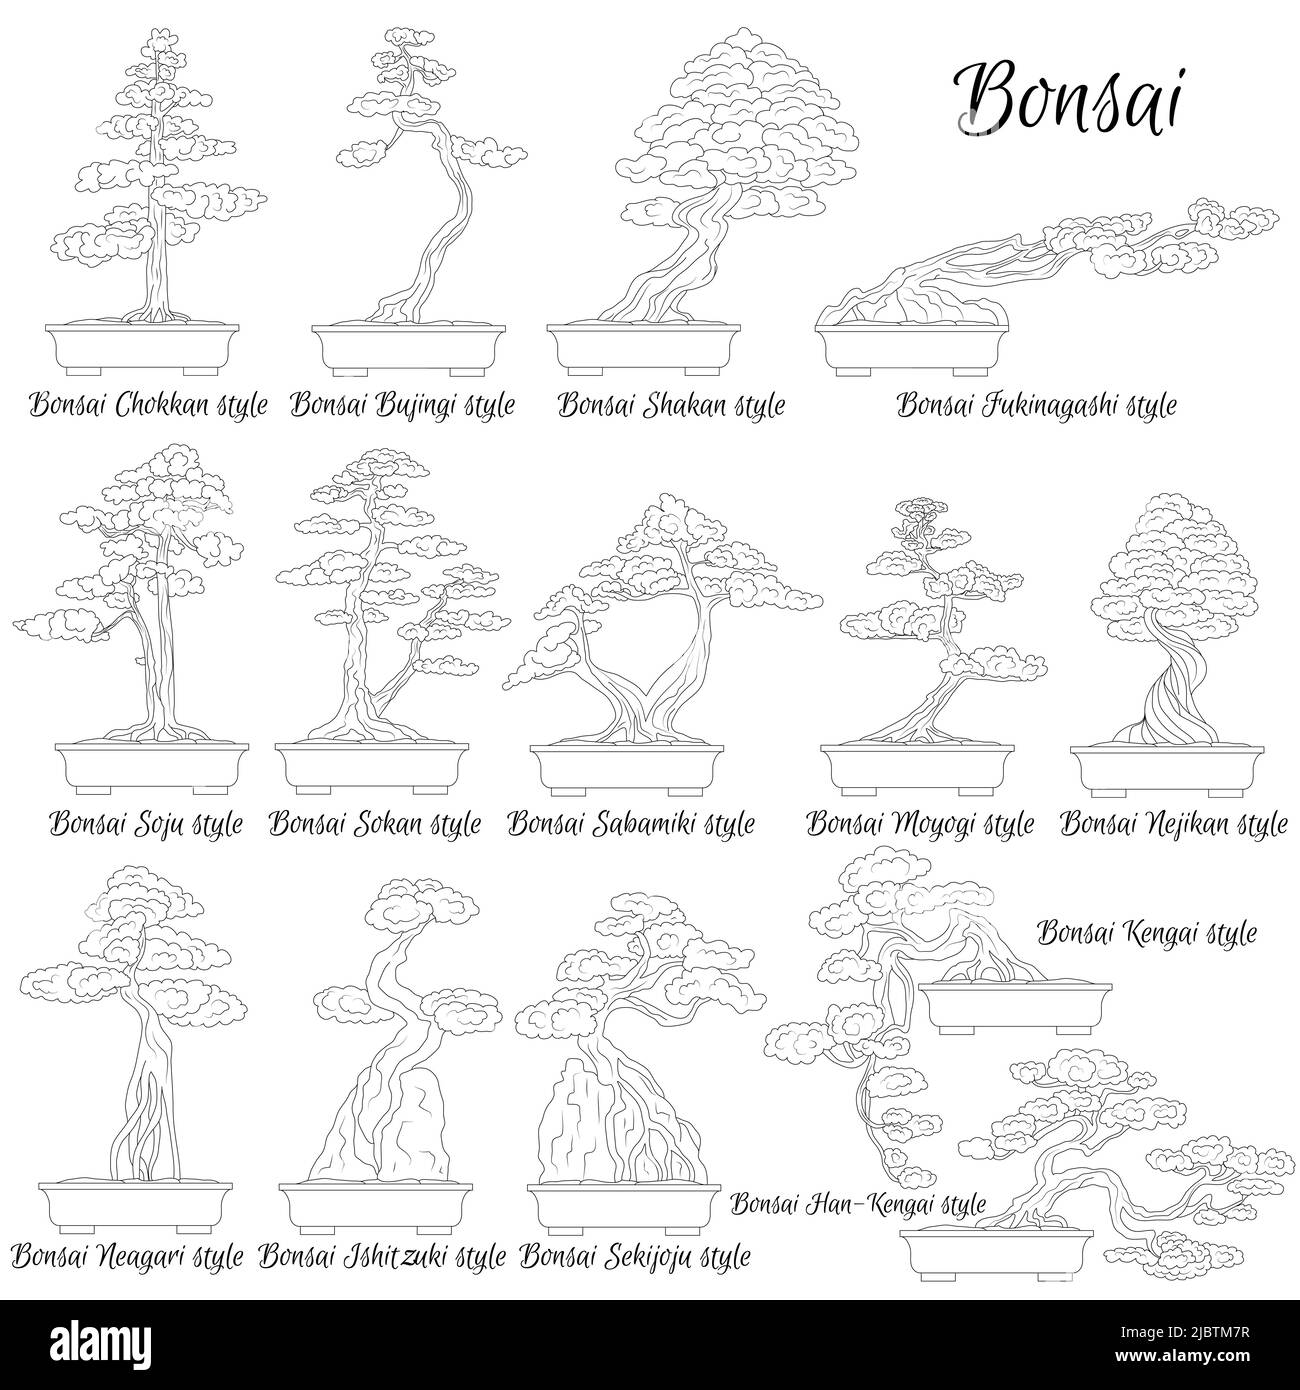 Bonsai. Different styles of miniature trees. The art of growing dwarf plants. Stock Vector